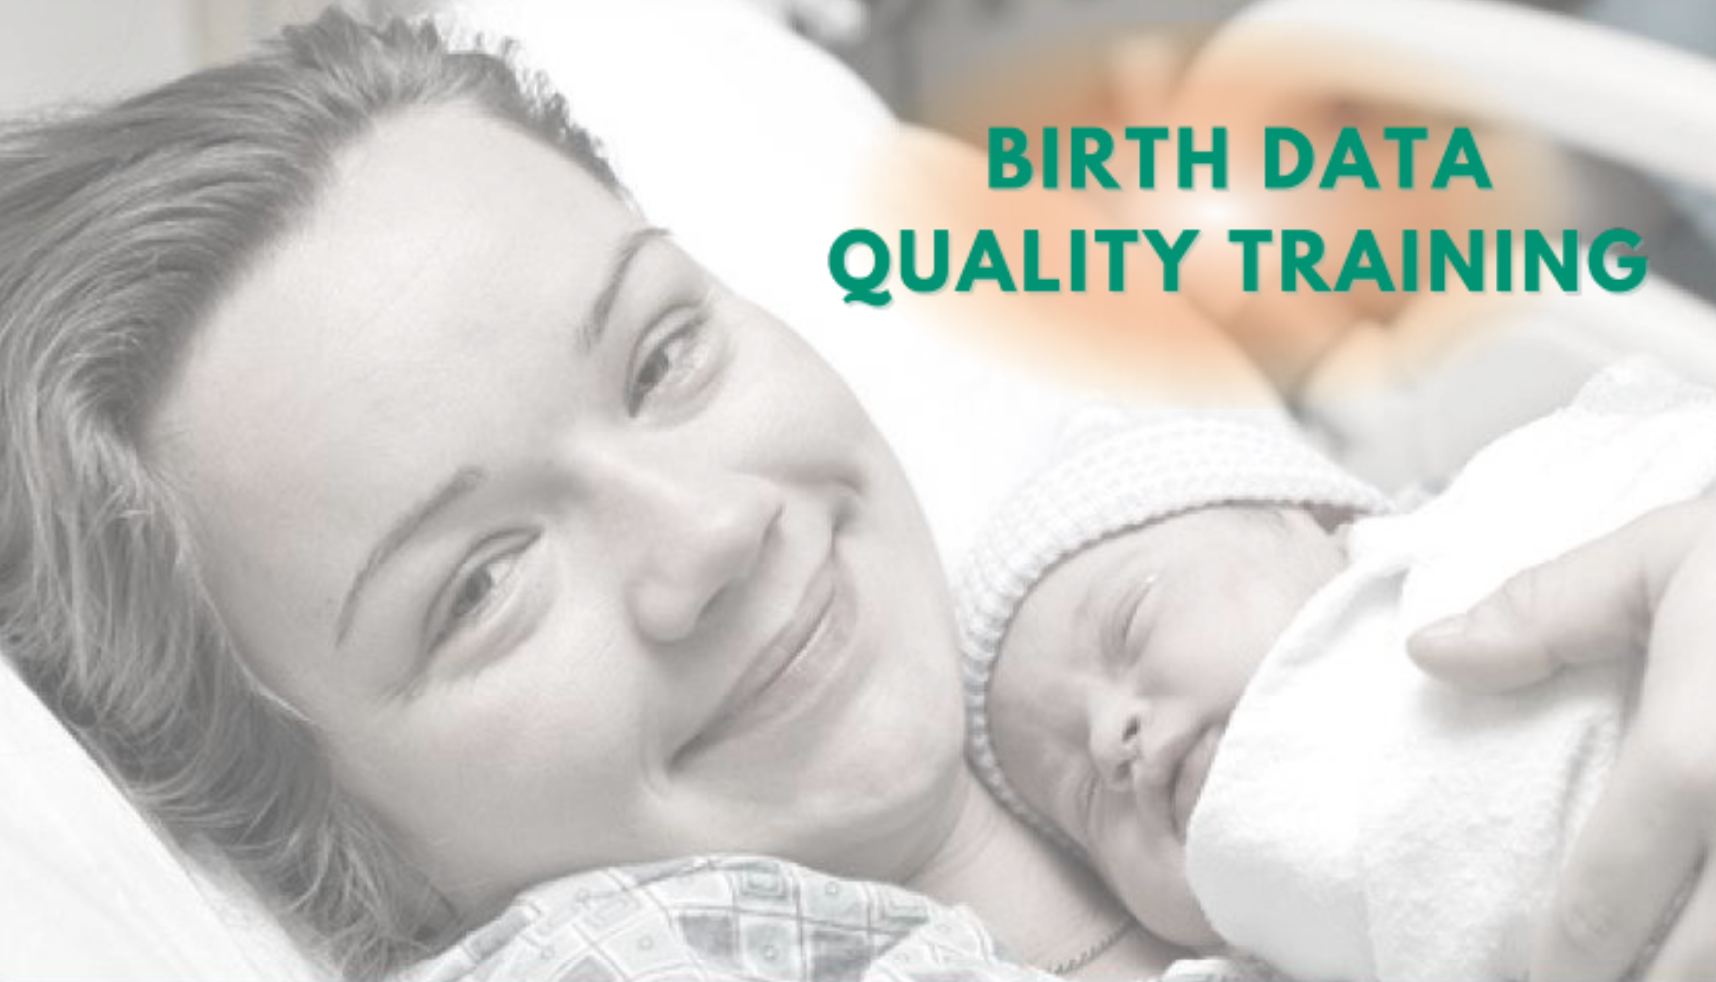 A black-and-white image of a woman smiling while holding her baby in a hospital setting. There is text that reads "Birth Data Quality Training" in the backdrop.